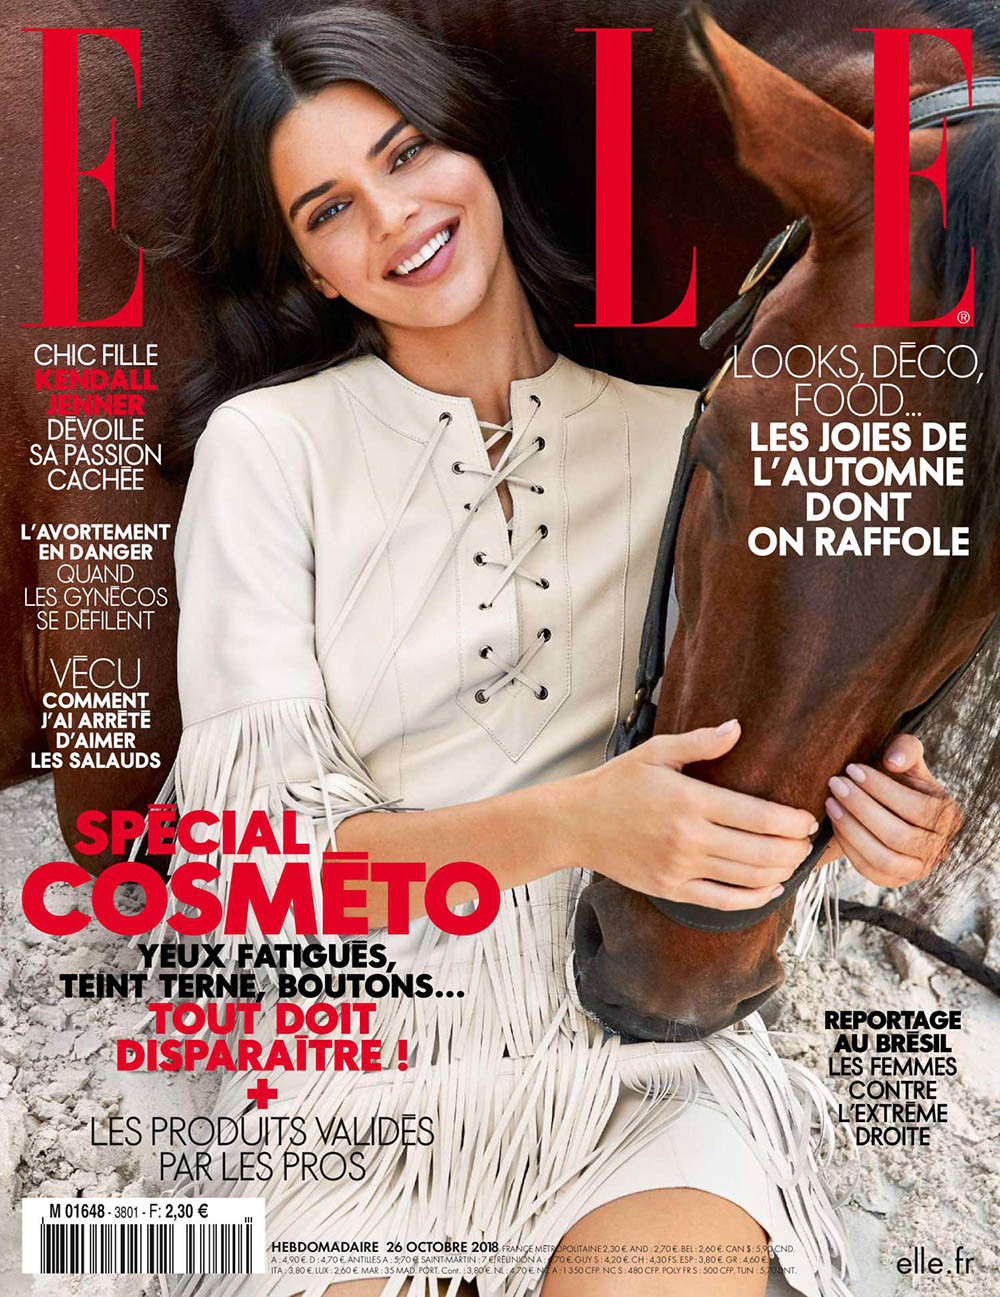 Kendall Jenner covers Elle France October 26th, 2018 by Fred Meylan ...